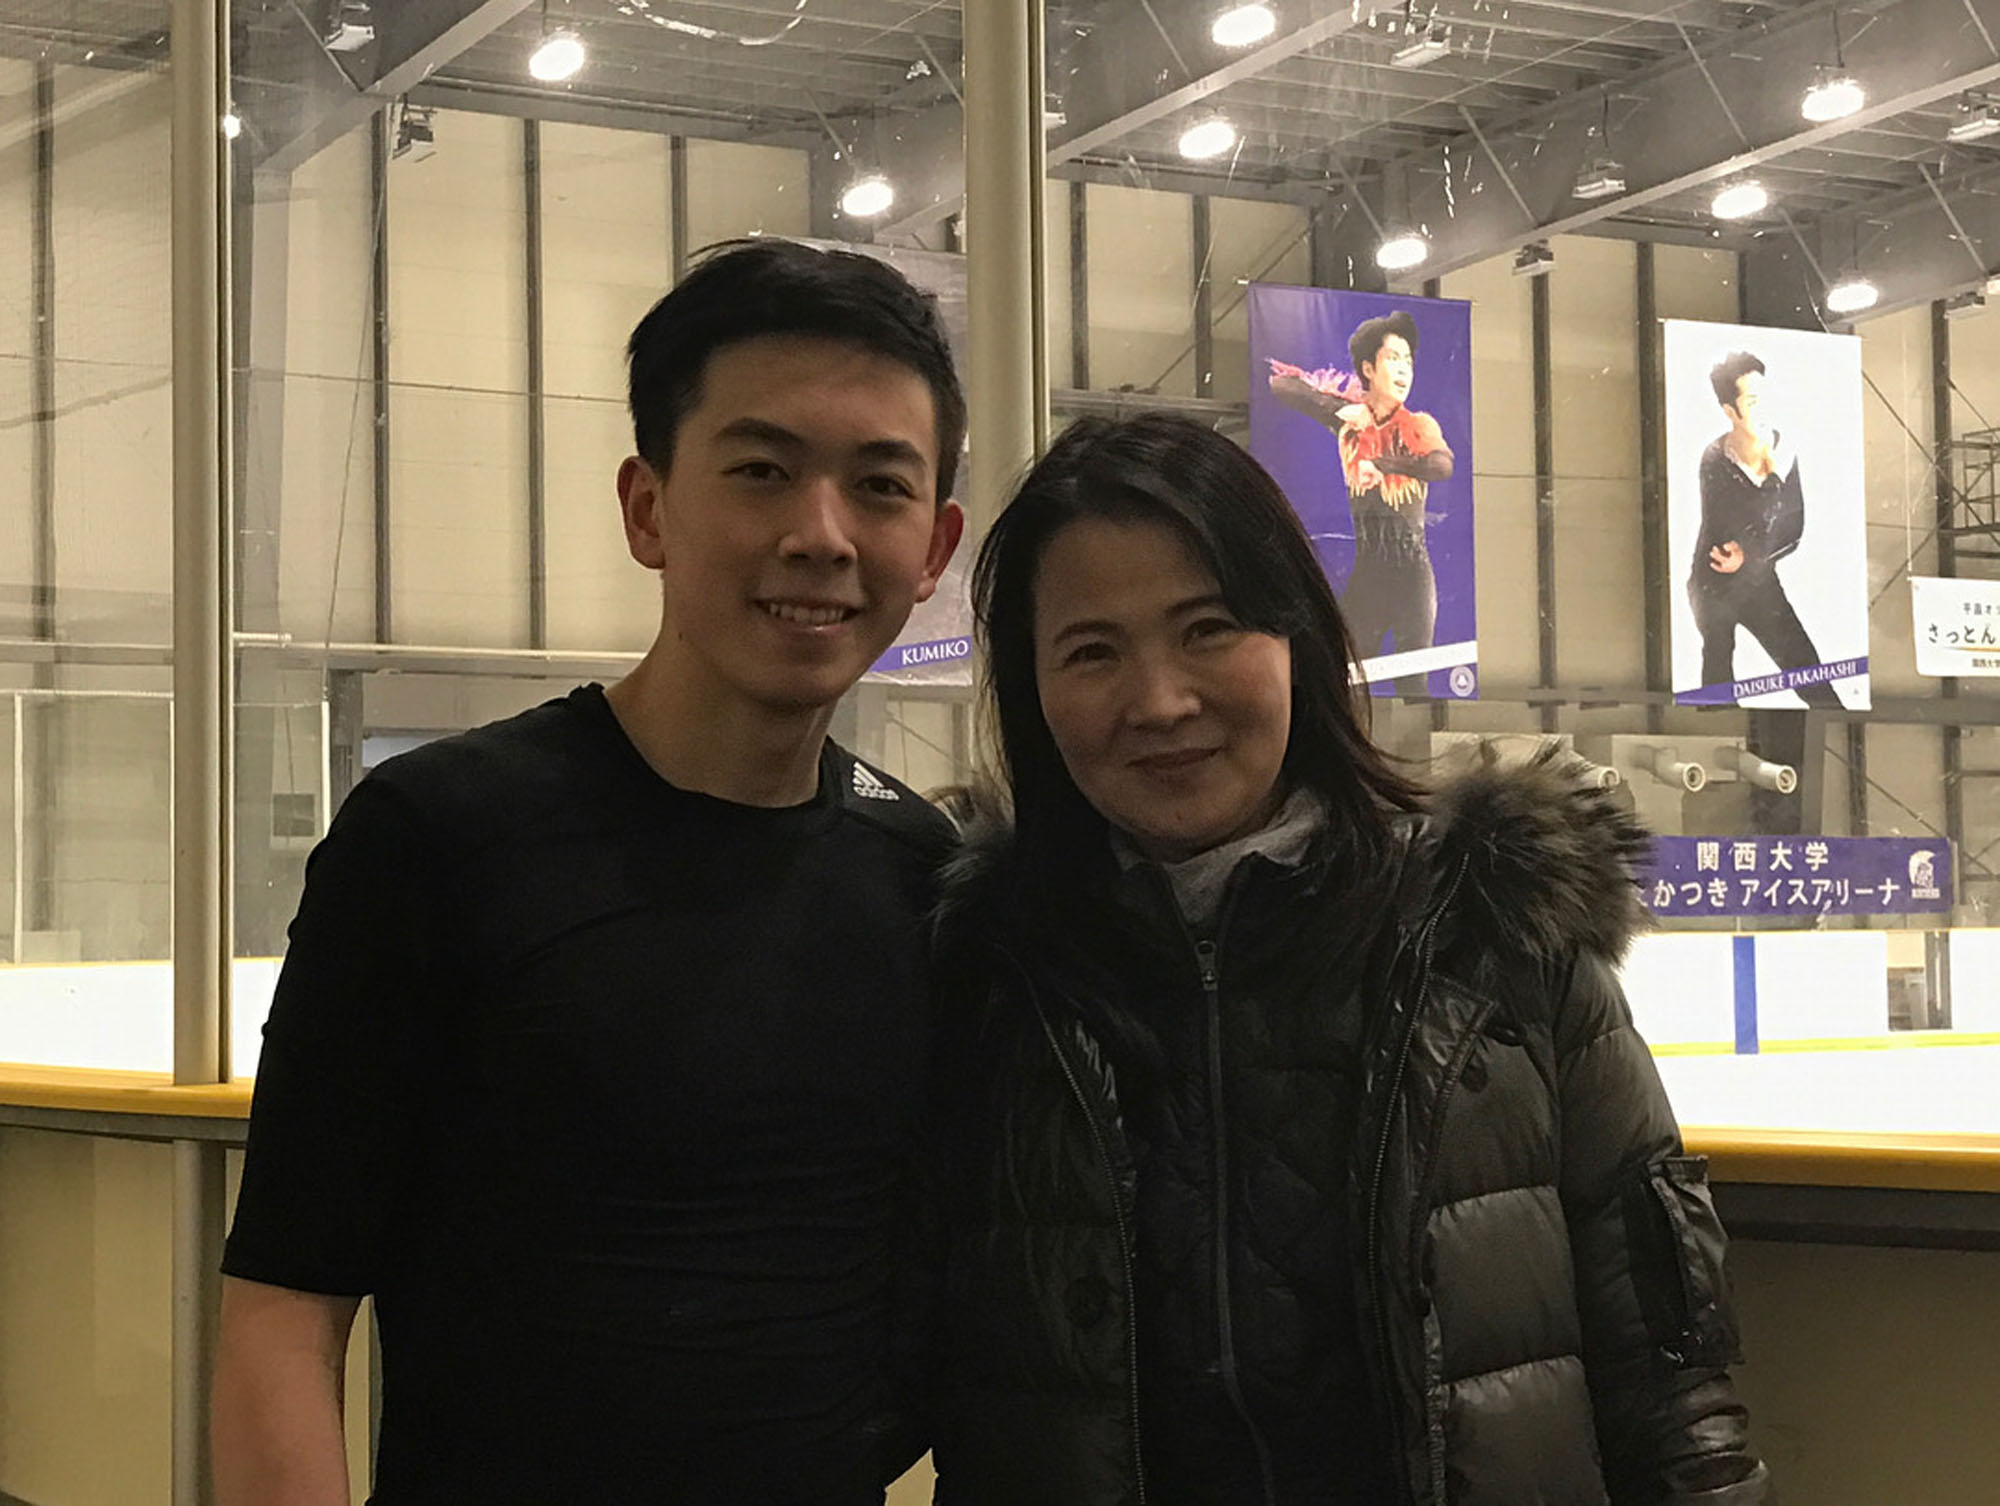 American skater Vincent Zhou, the world bronze medalist, and top coach Mie Hamada, seen at Kansai University's rink, have collaborated for the past two seasons in Japan and the U.S. with positive results. Source: Instagram | U.S. NAVY